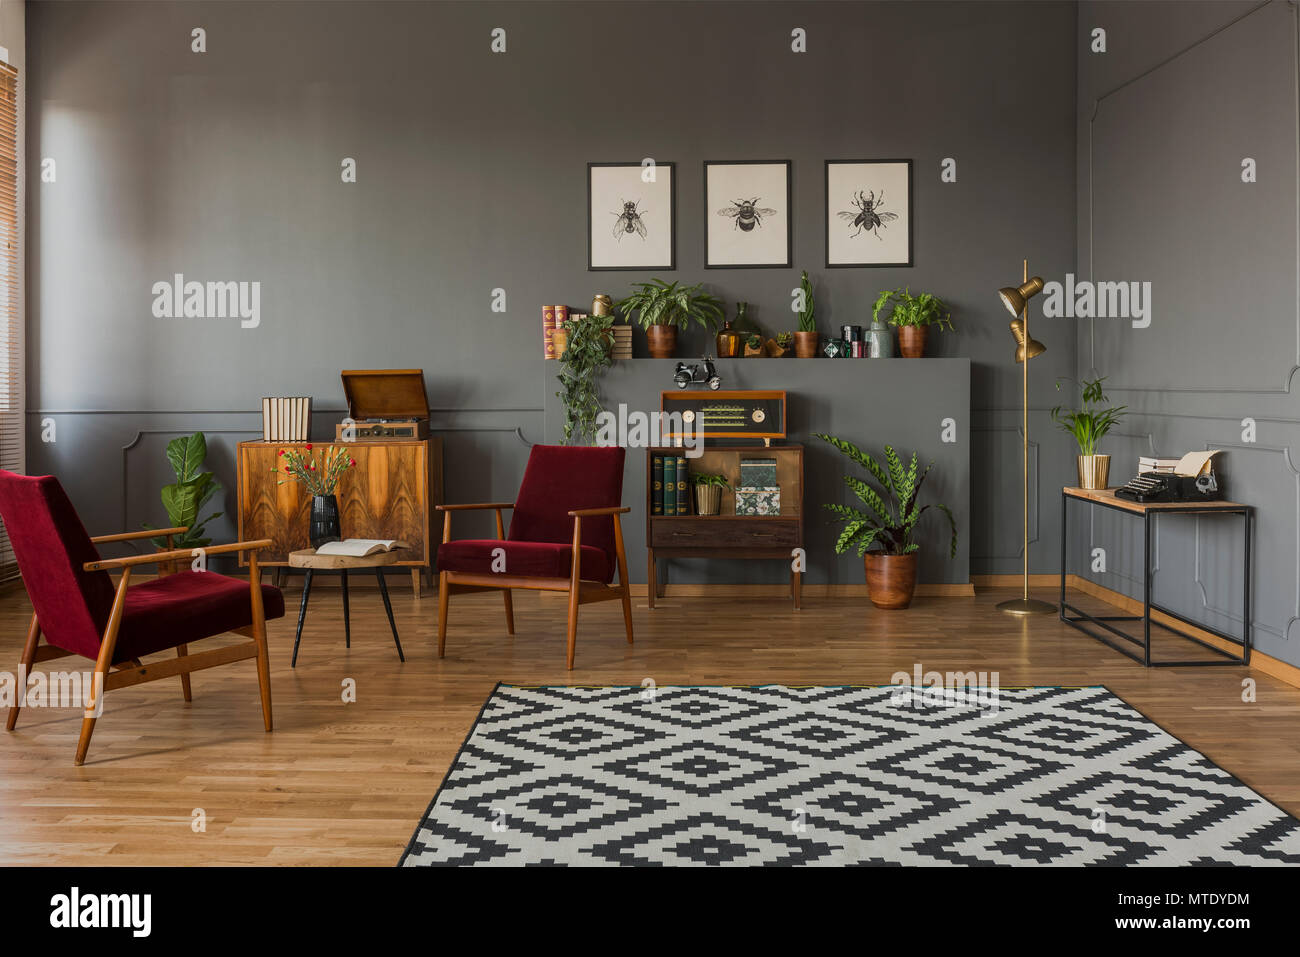 Patterned carpet in grey living room interior with dark red wooden armchairs and posters. Real photo Stock Photo